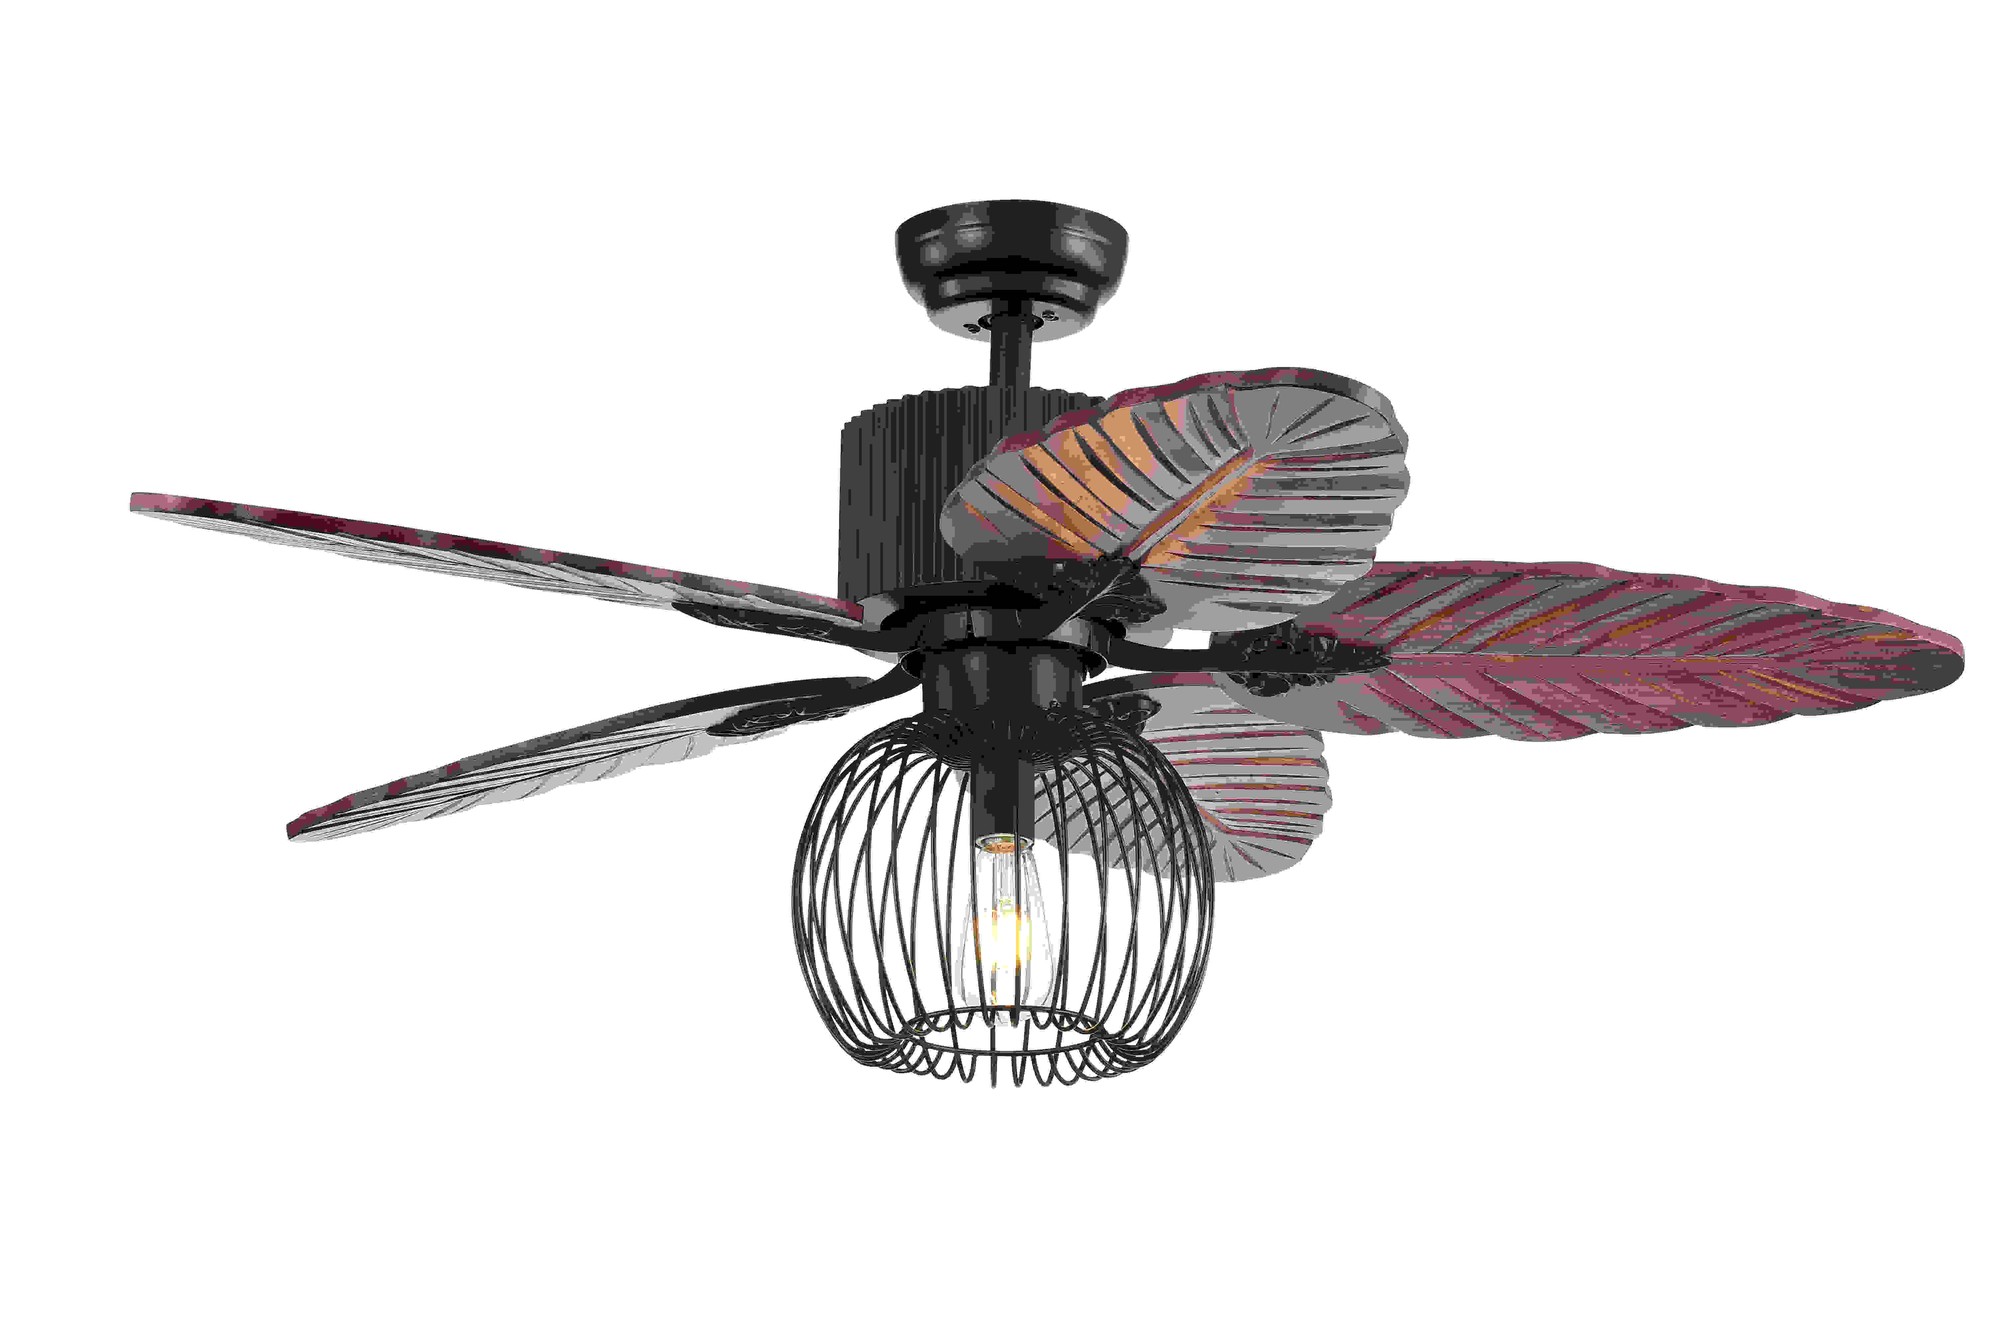 Aguano 48-inch Lighted Ceiling Fan & Broad Leaf Blades (remote controlled)